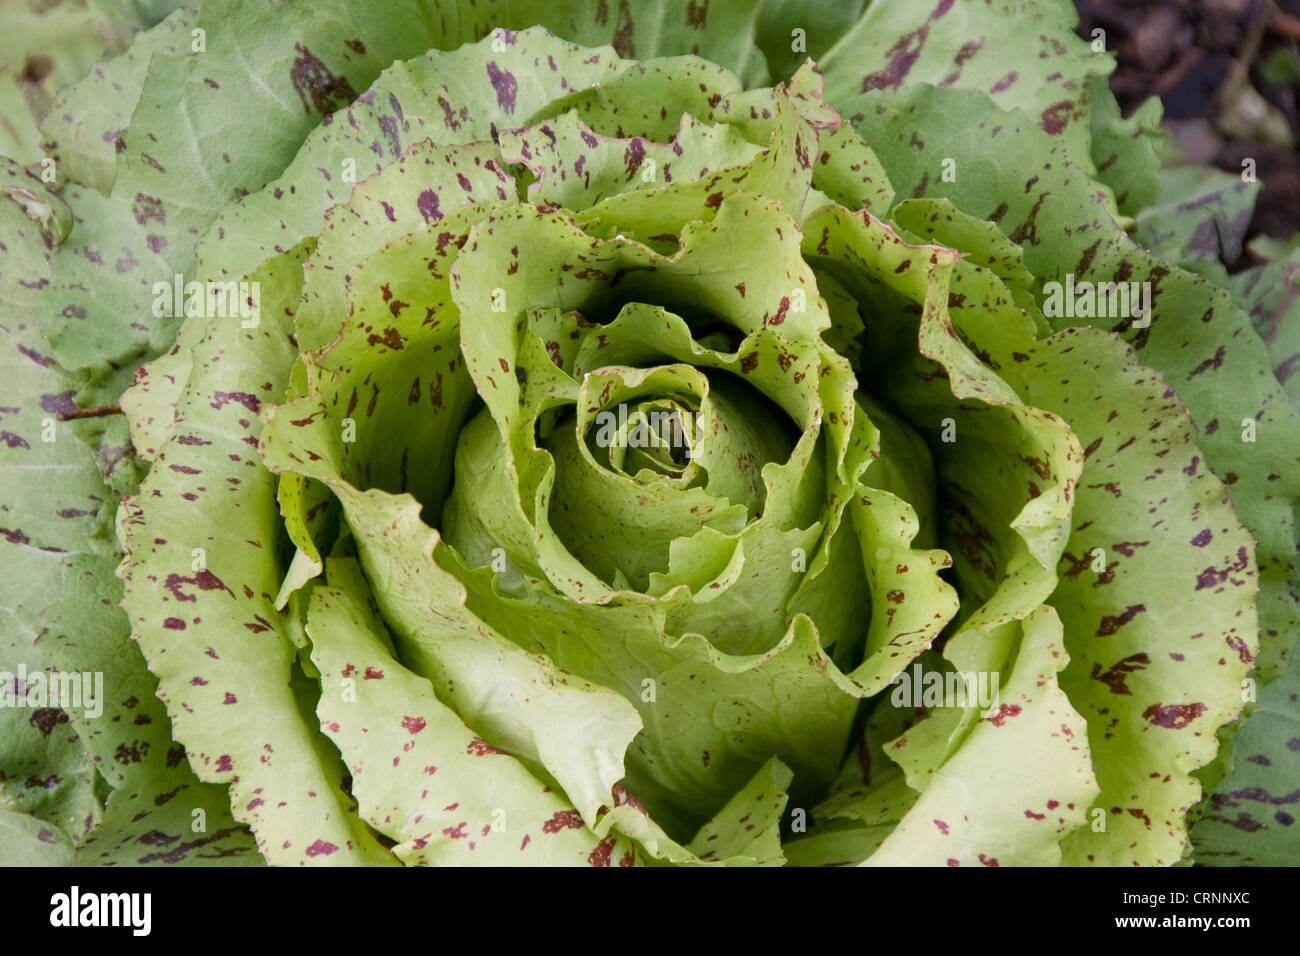 Leaf vegetable chicory growing in Australia Stock Photo